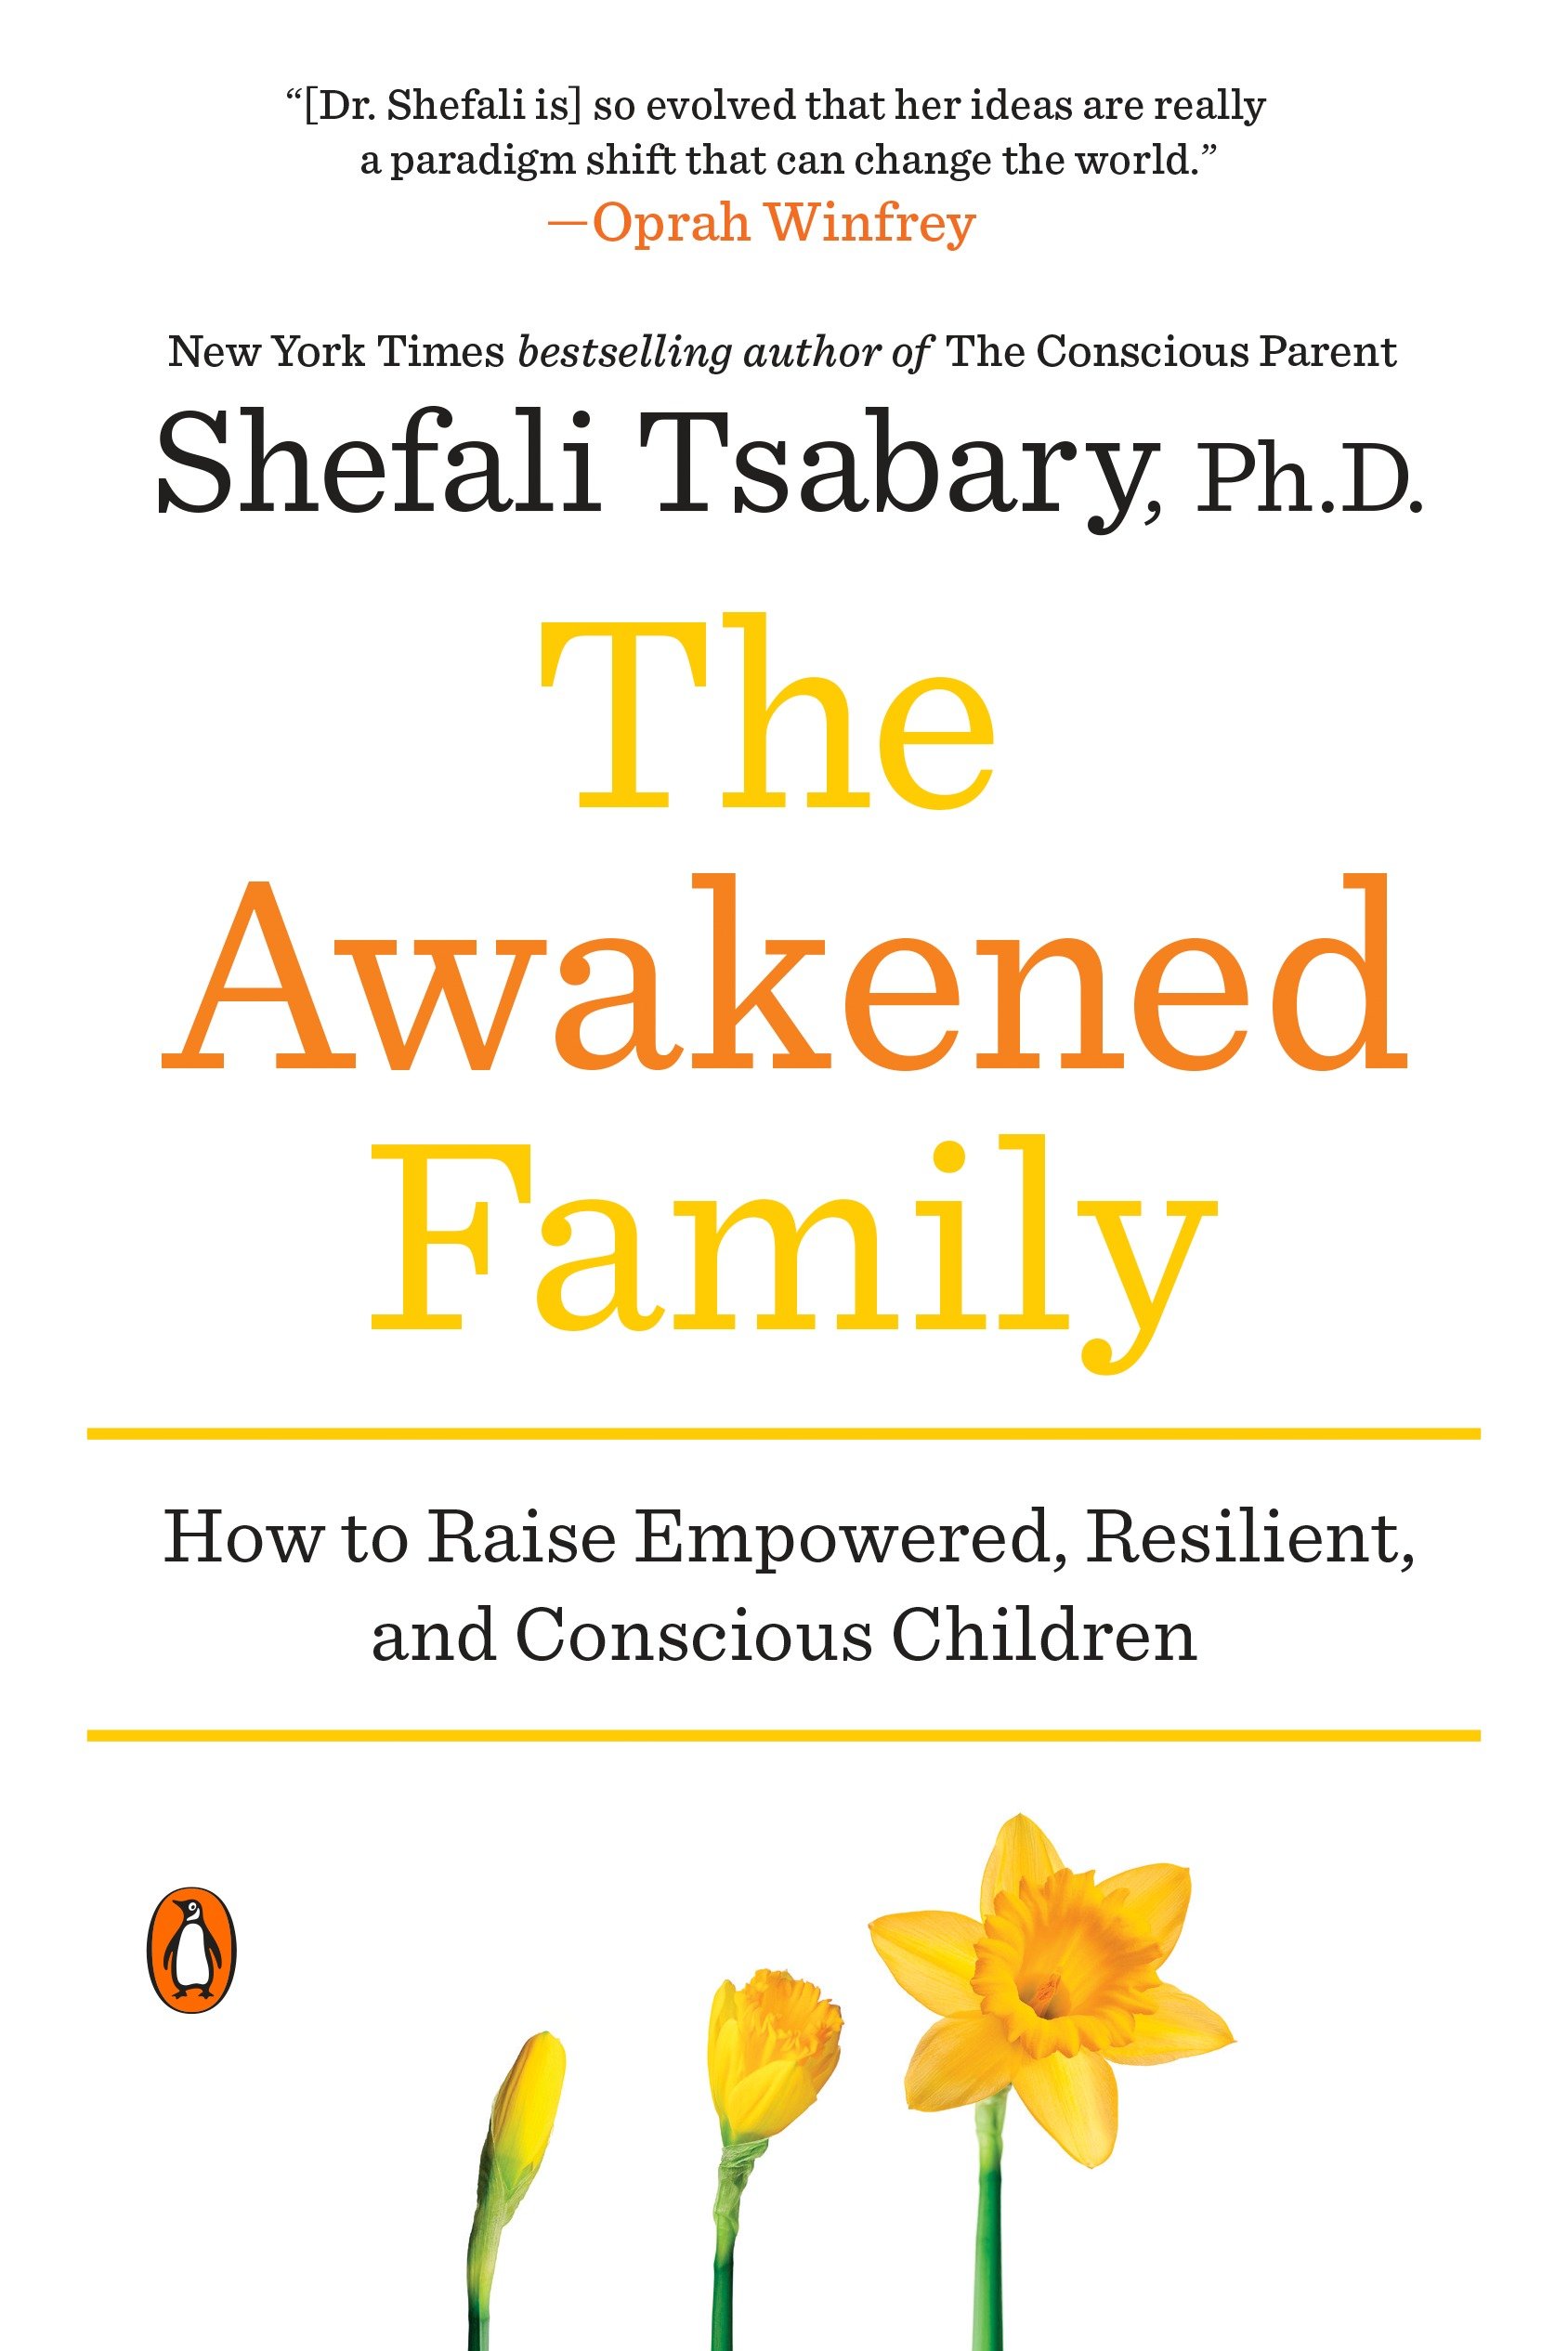 Umschlagbild für The Awakened Family [electronic resource] : How to Raise Empowered, Resilient, and Conscious Children